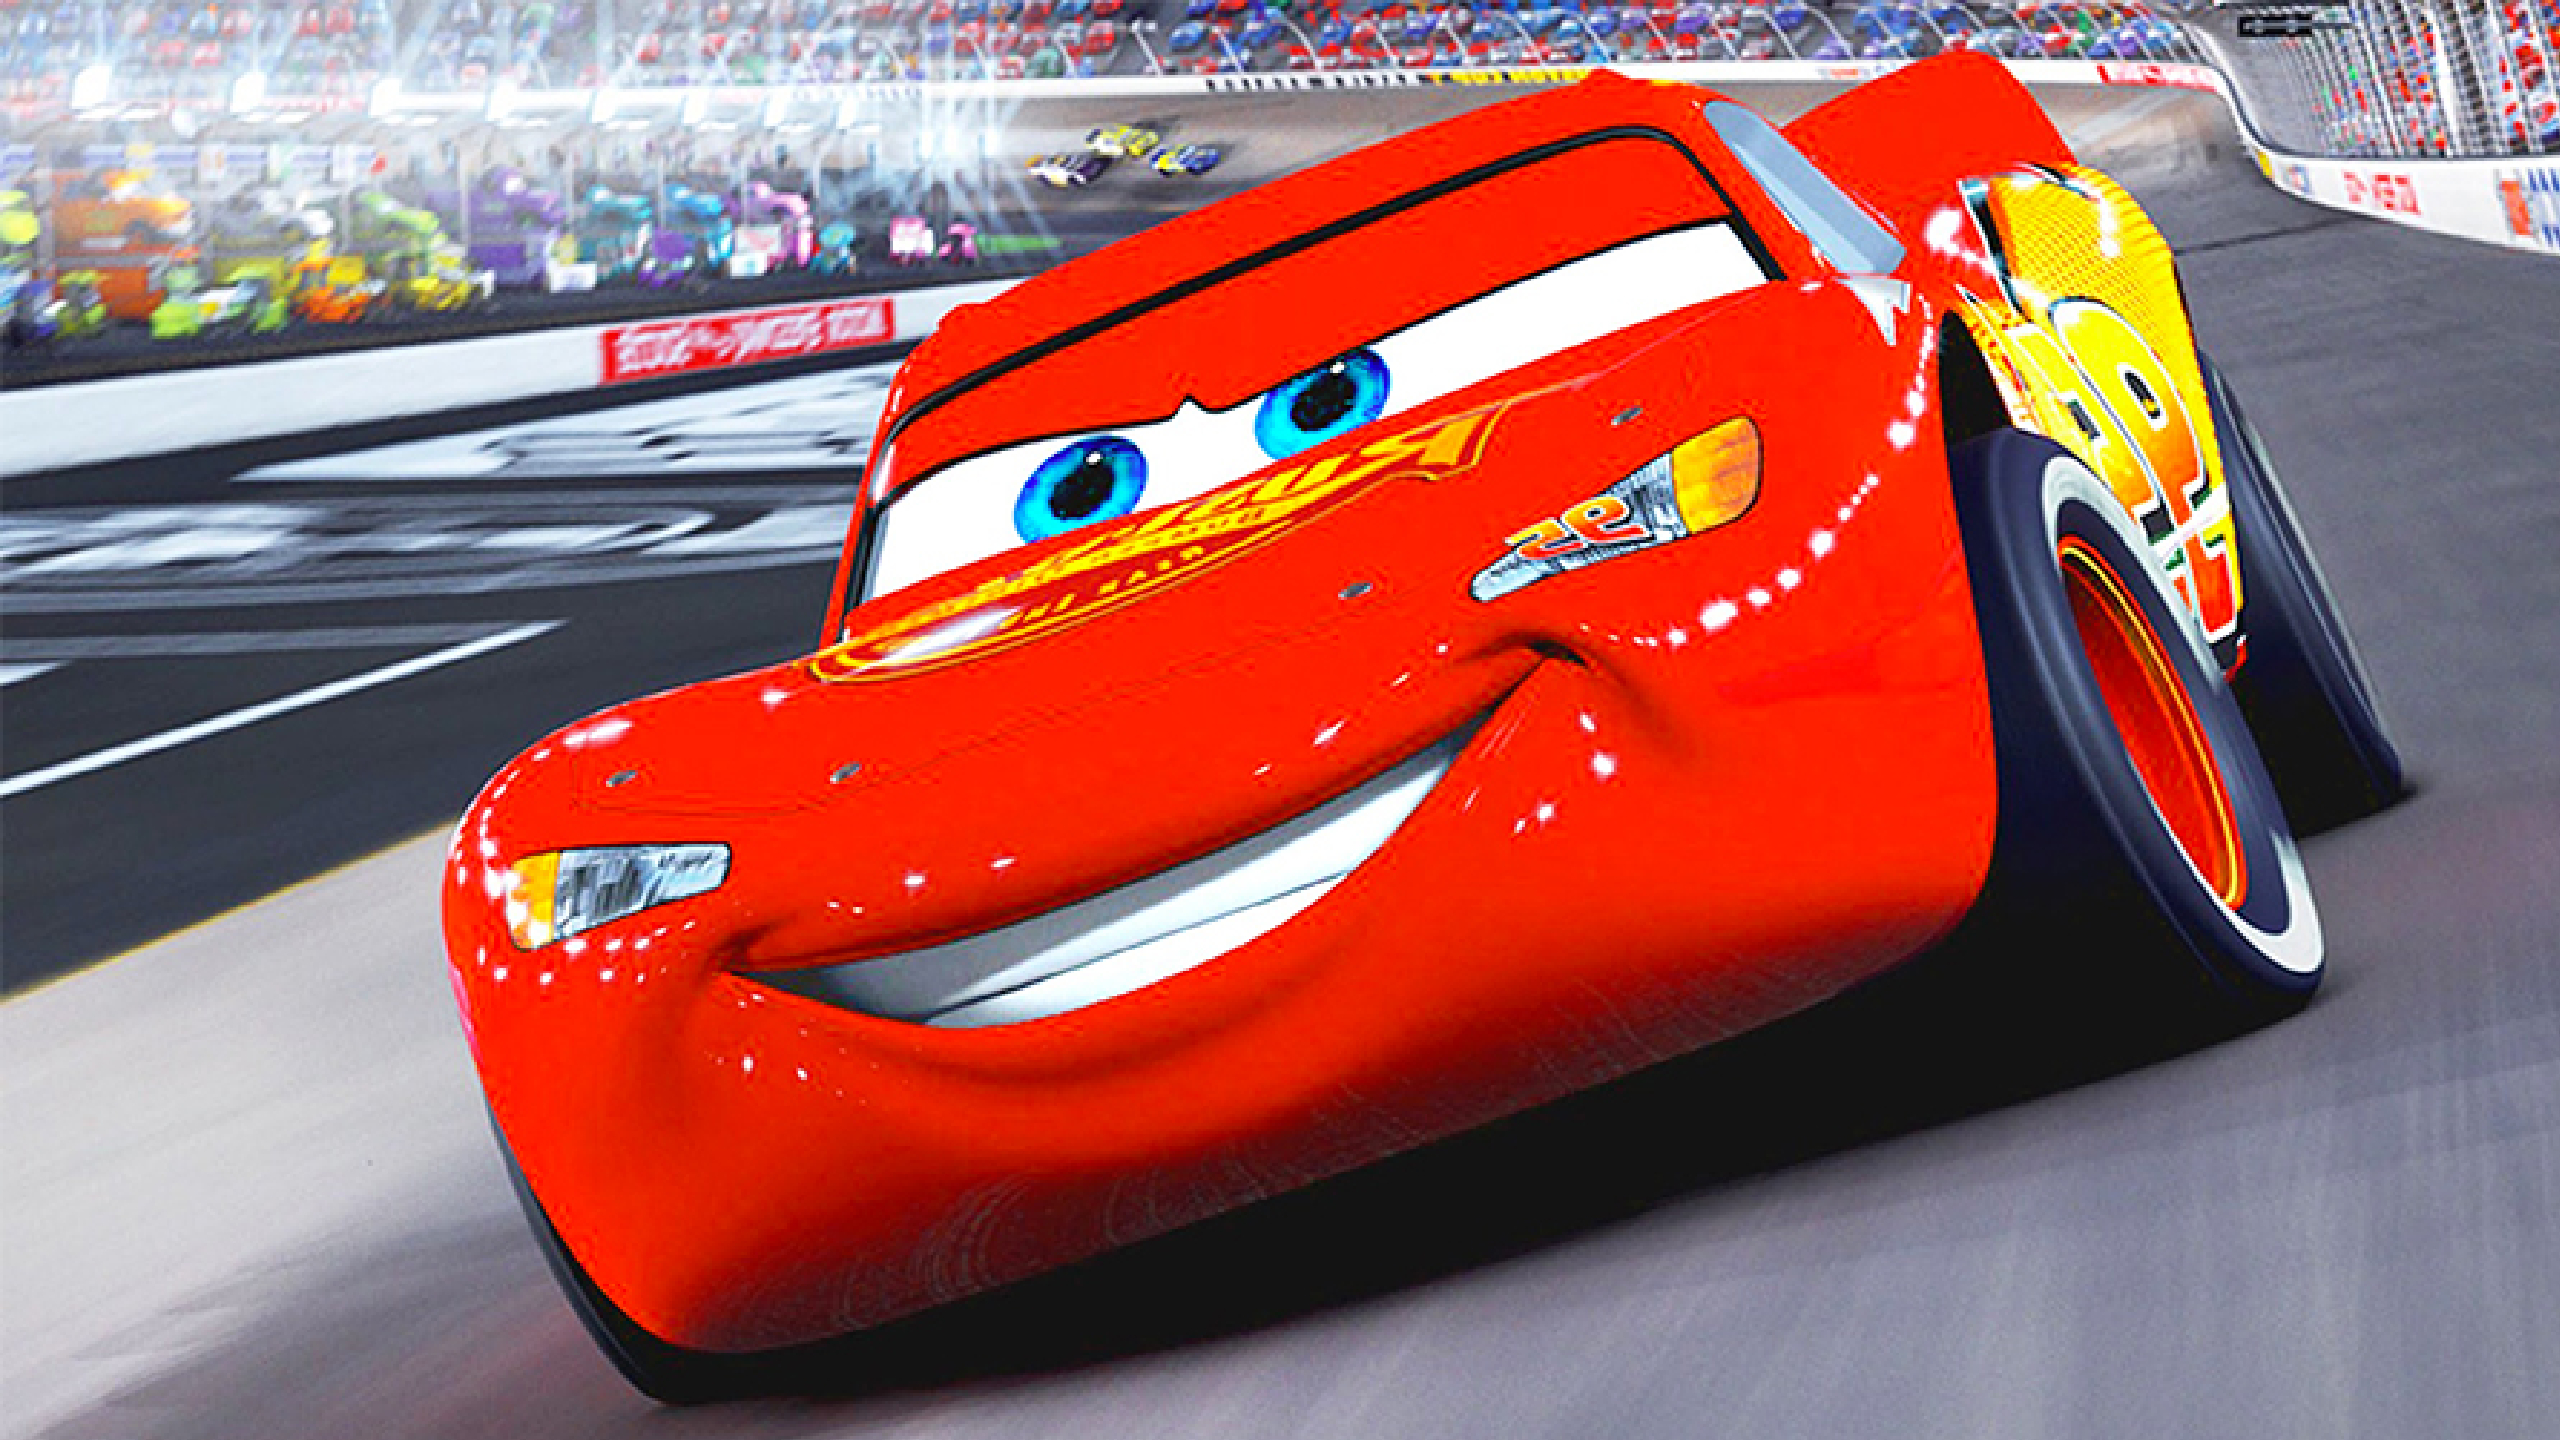 Cars 3 Preview: Why Pixar Revealed the Film With Lightning McQueen's Crash  - IGN